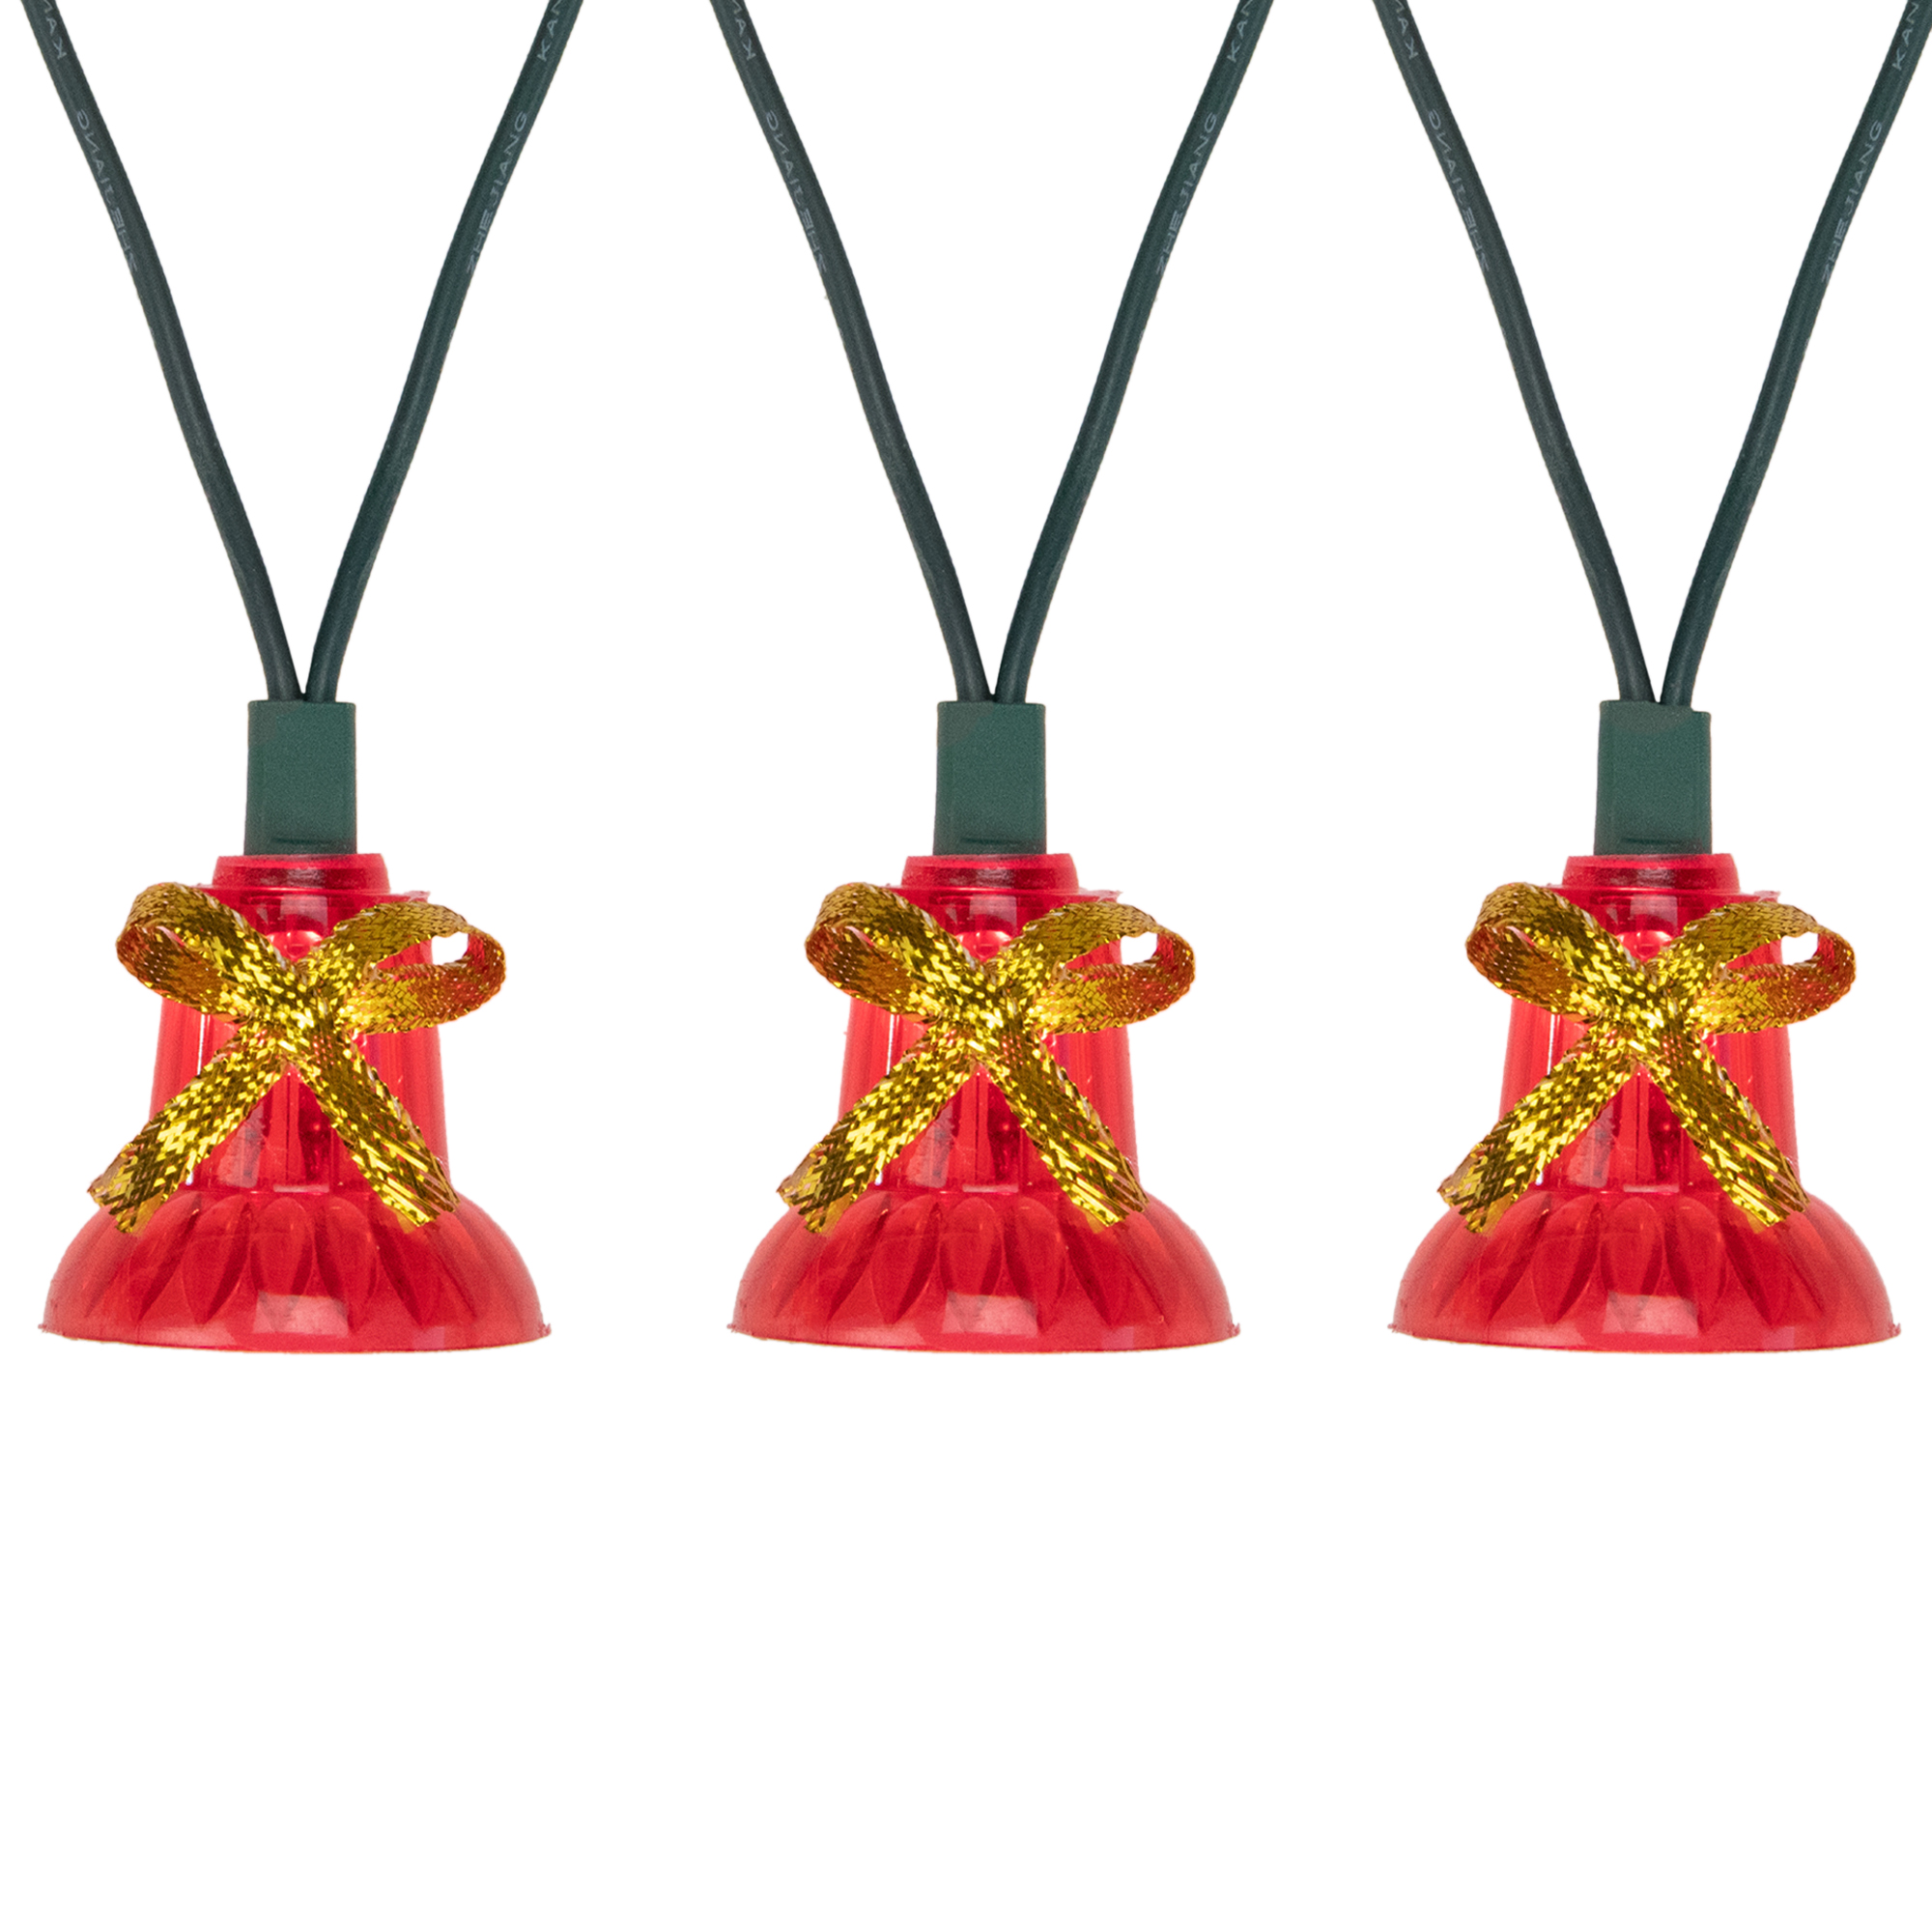 Northlight 40-Count Musical Bells Multi-Function Christmas Lights, 13ft Green Wire - image 1 of 4